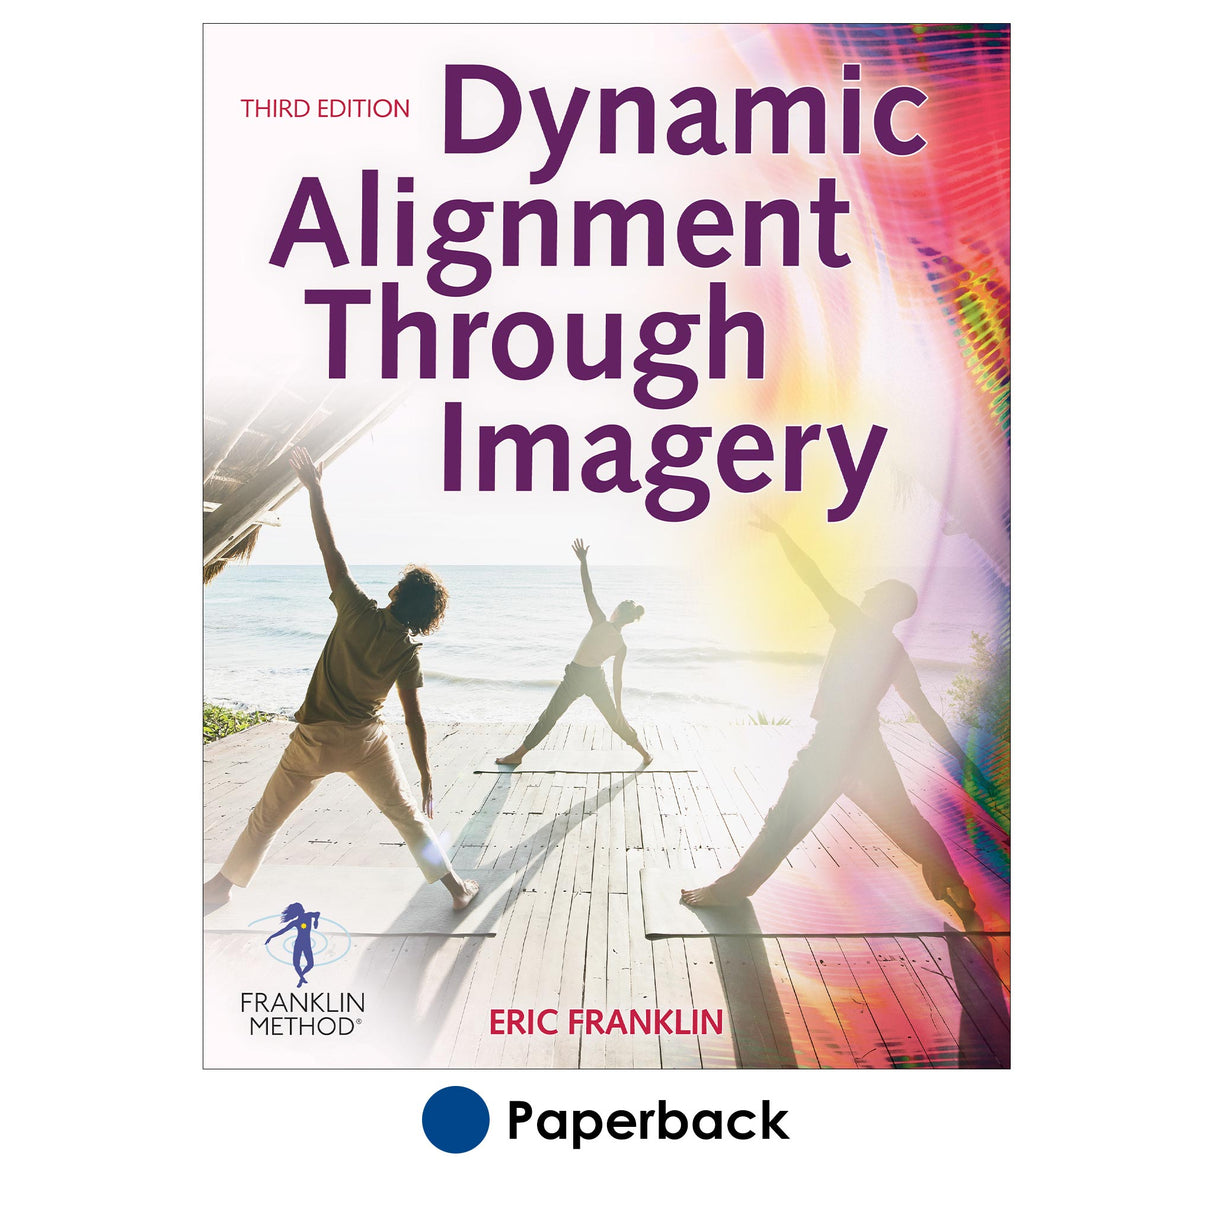 Dynamic Alignment Through Imagery-3rd Edition